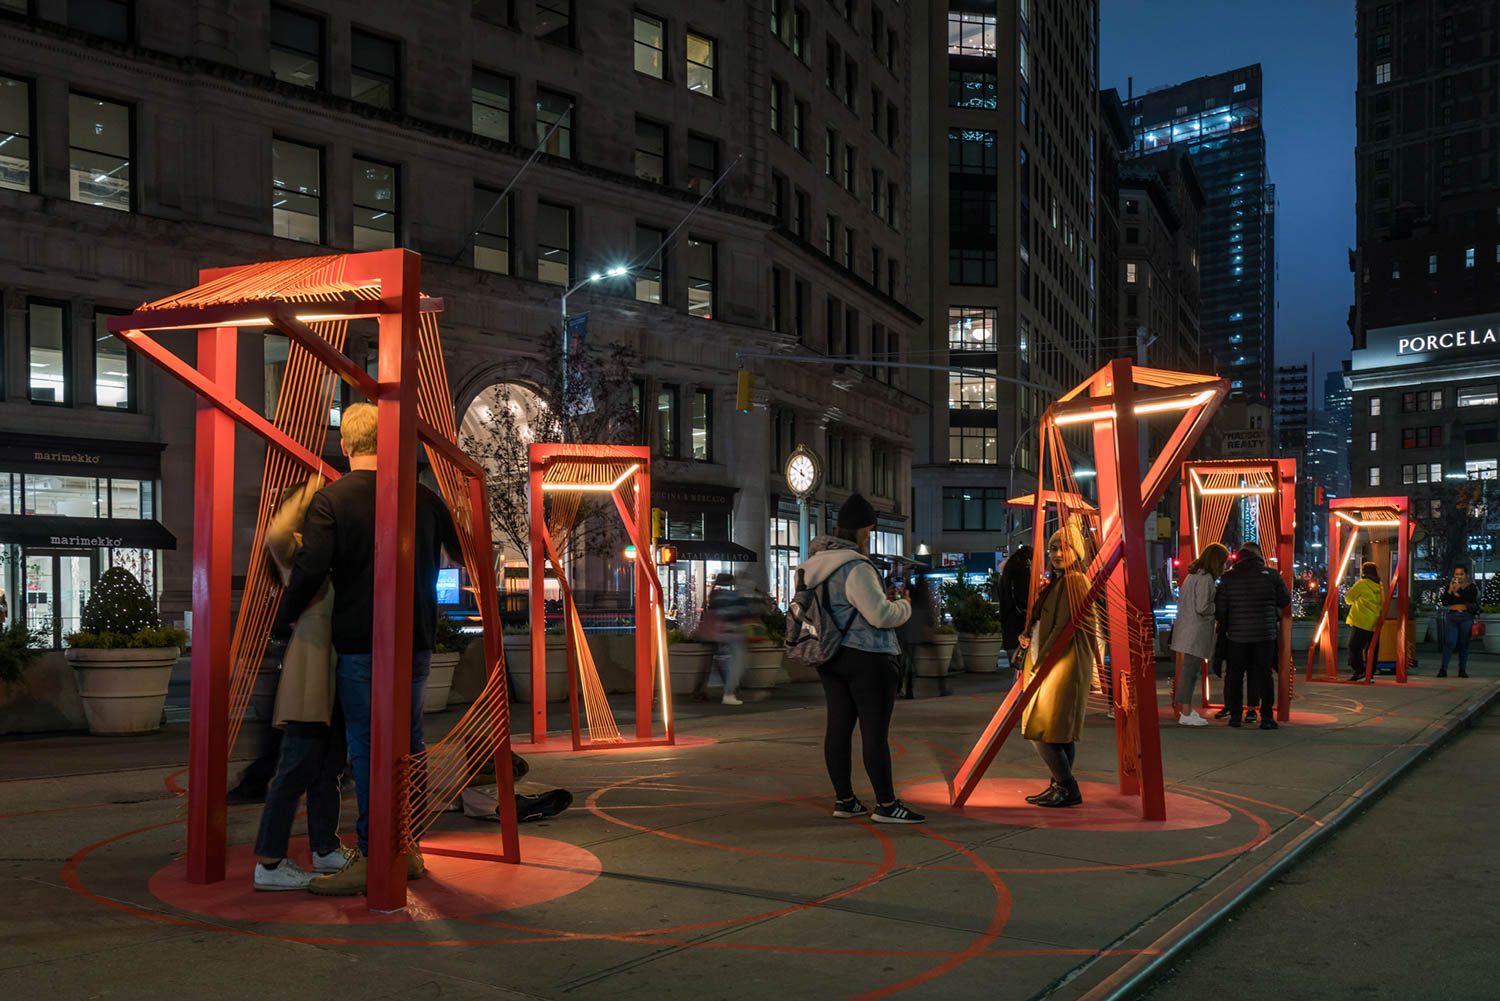 Cooke John Studio’s “Point of Action” installation in New York’s Flatiron Plaza. Photography by Cameron Blaylock.